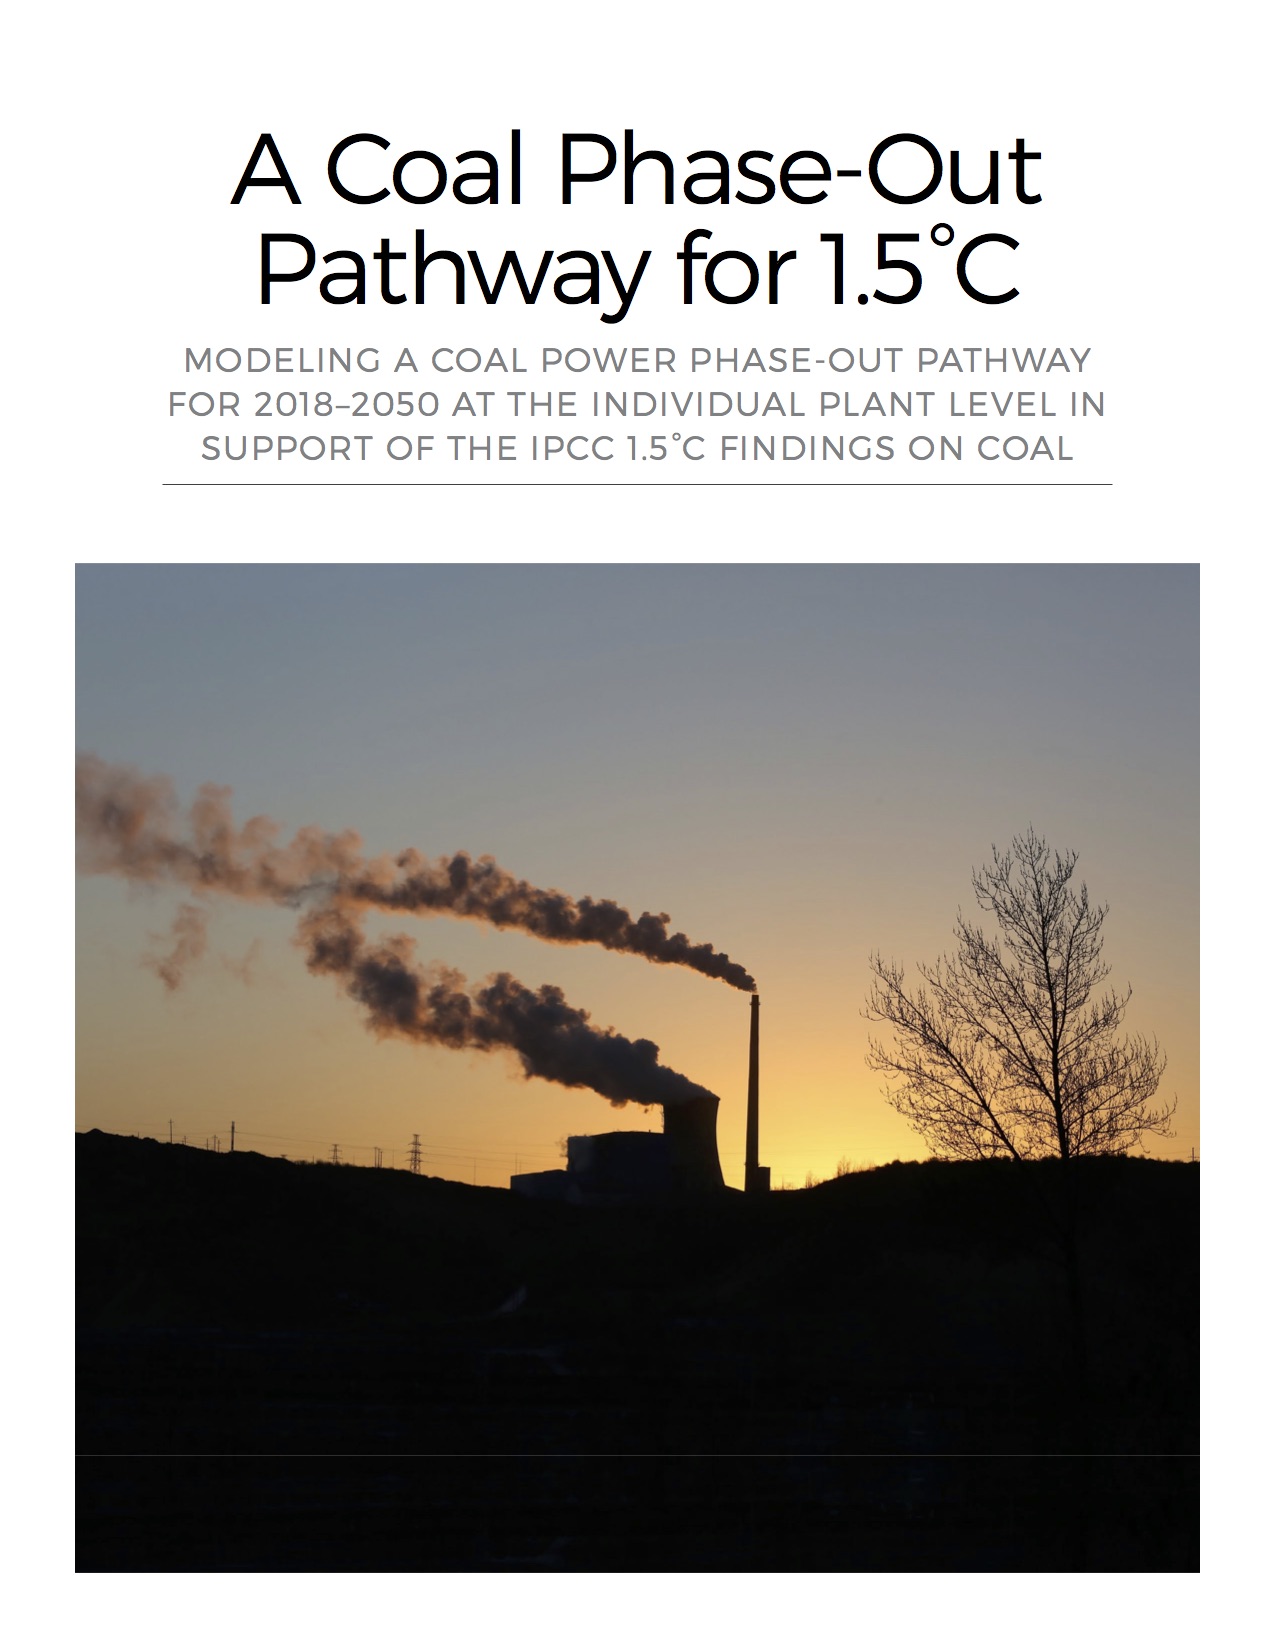 A Coal Phase-Out Pathway for 1.5°C